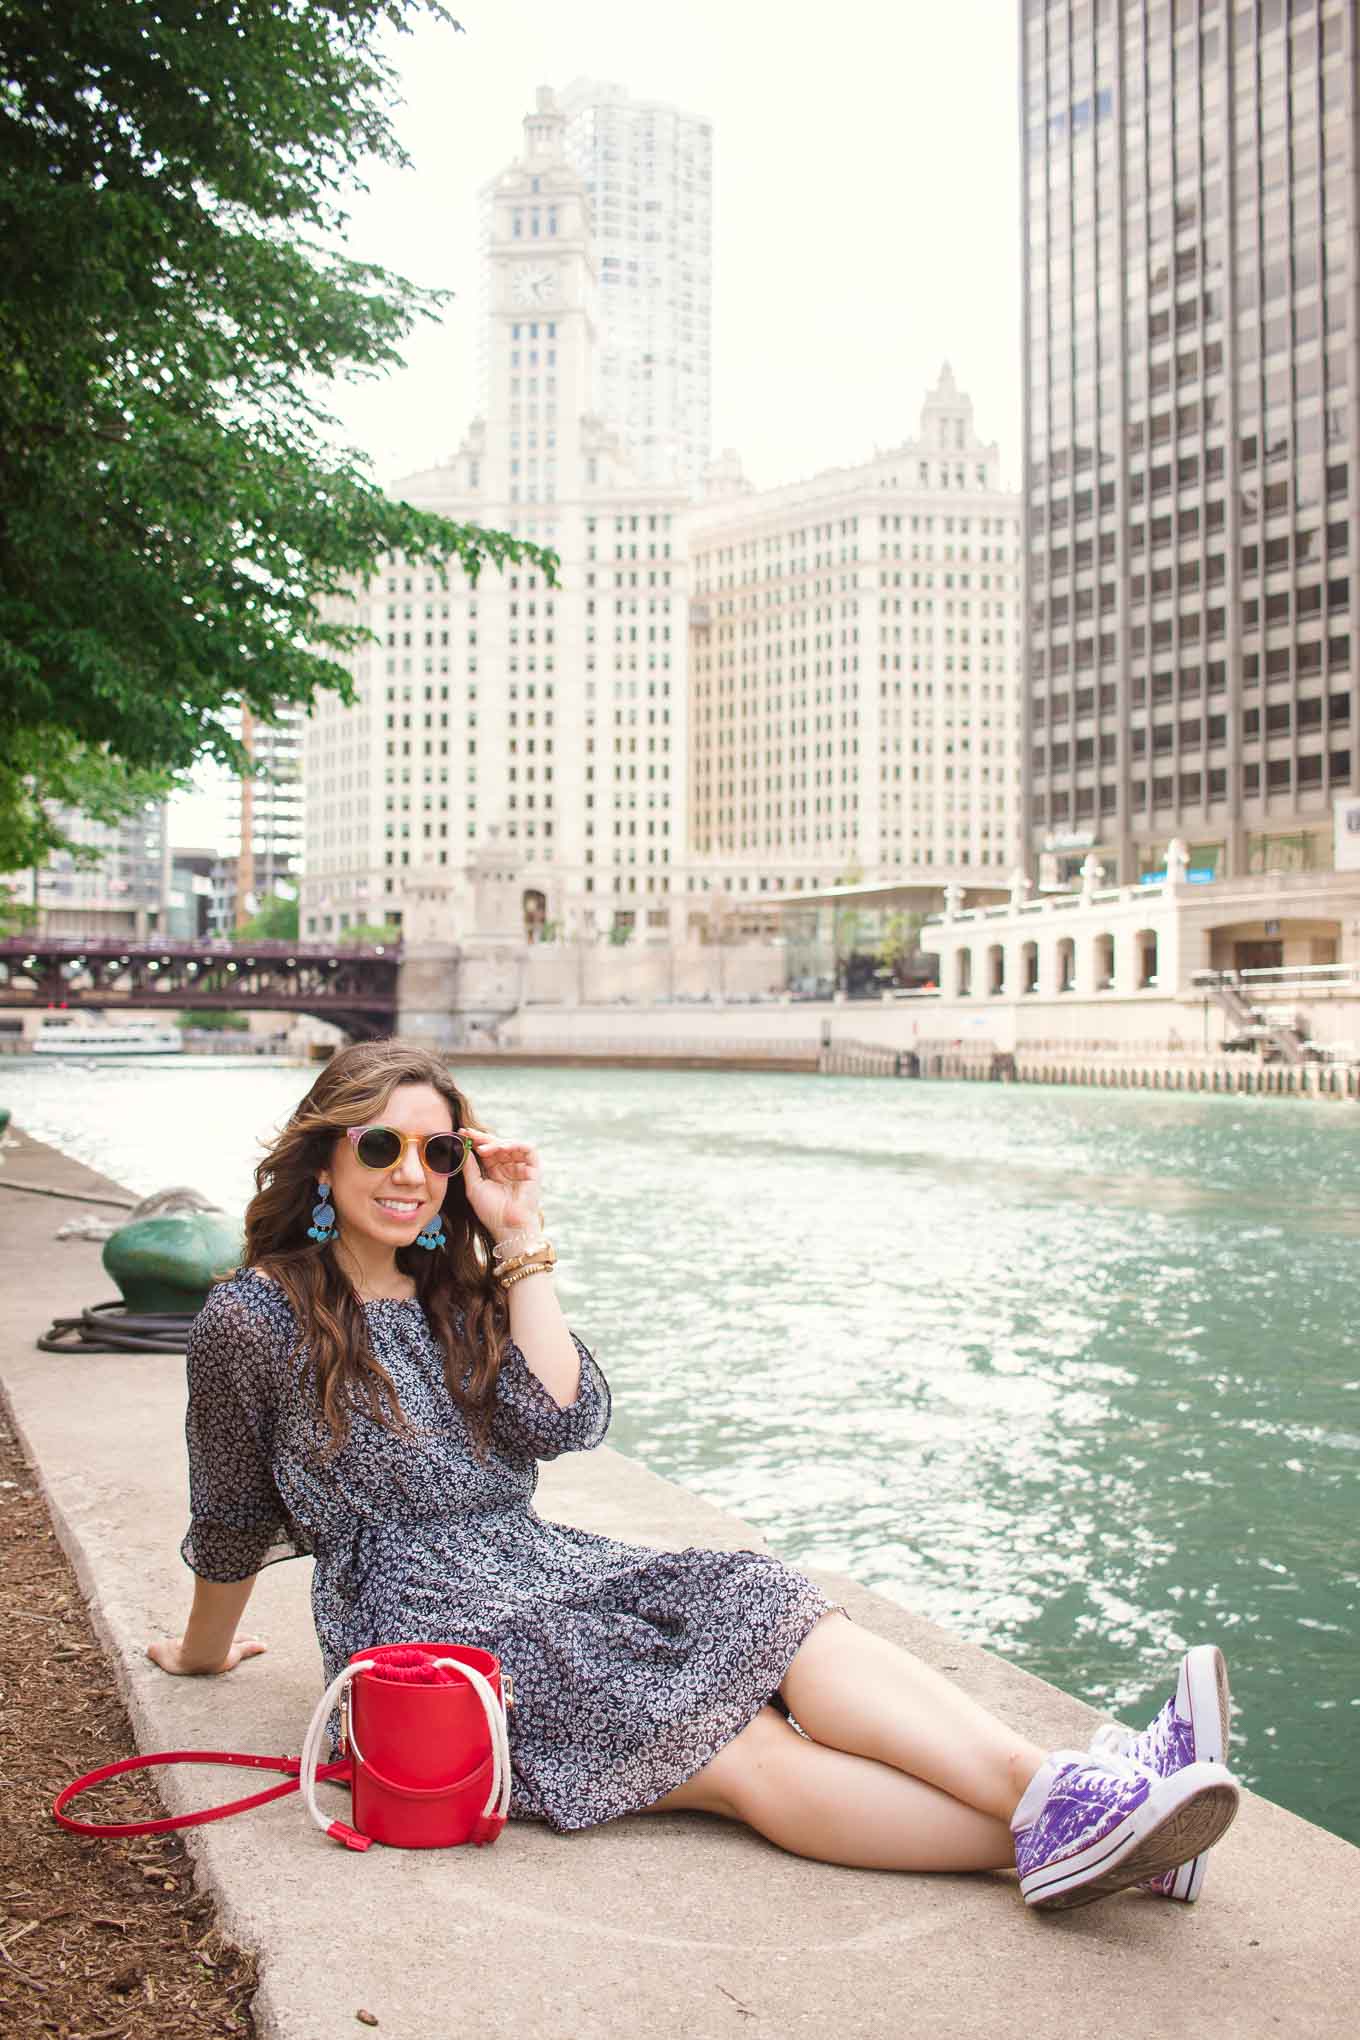 The Perfect Summer Dress & On Mondays We Link Up (#68) featured by popular Chicago style blogger, Glass of Glam